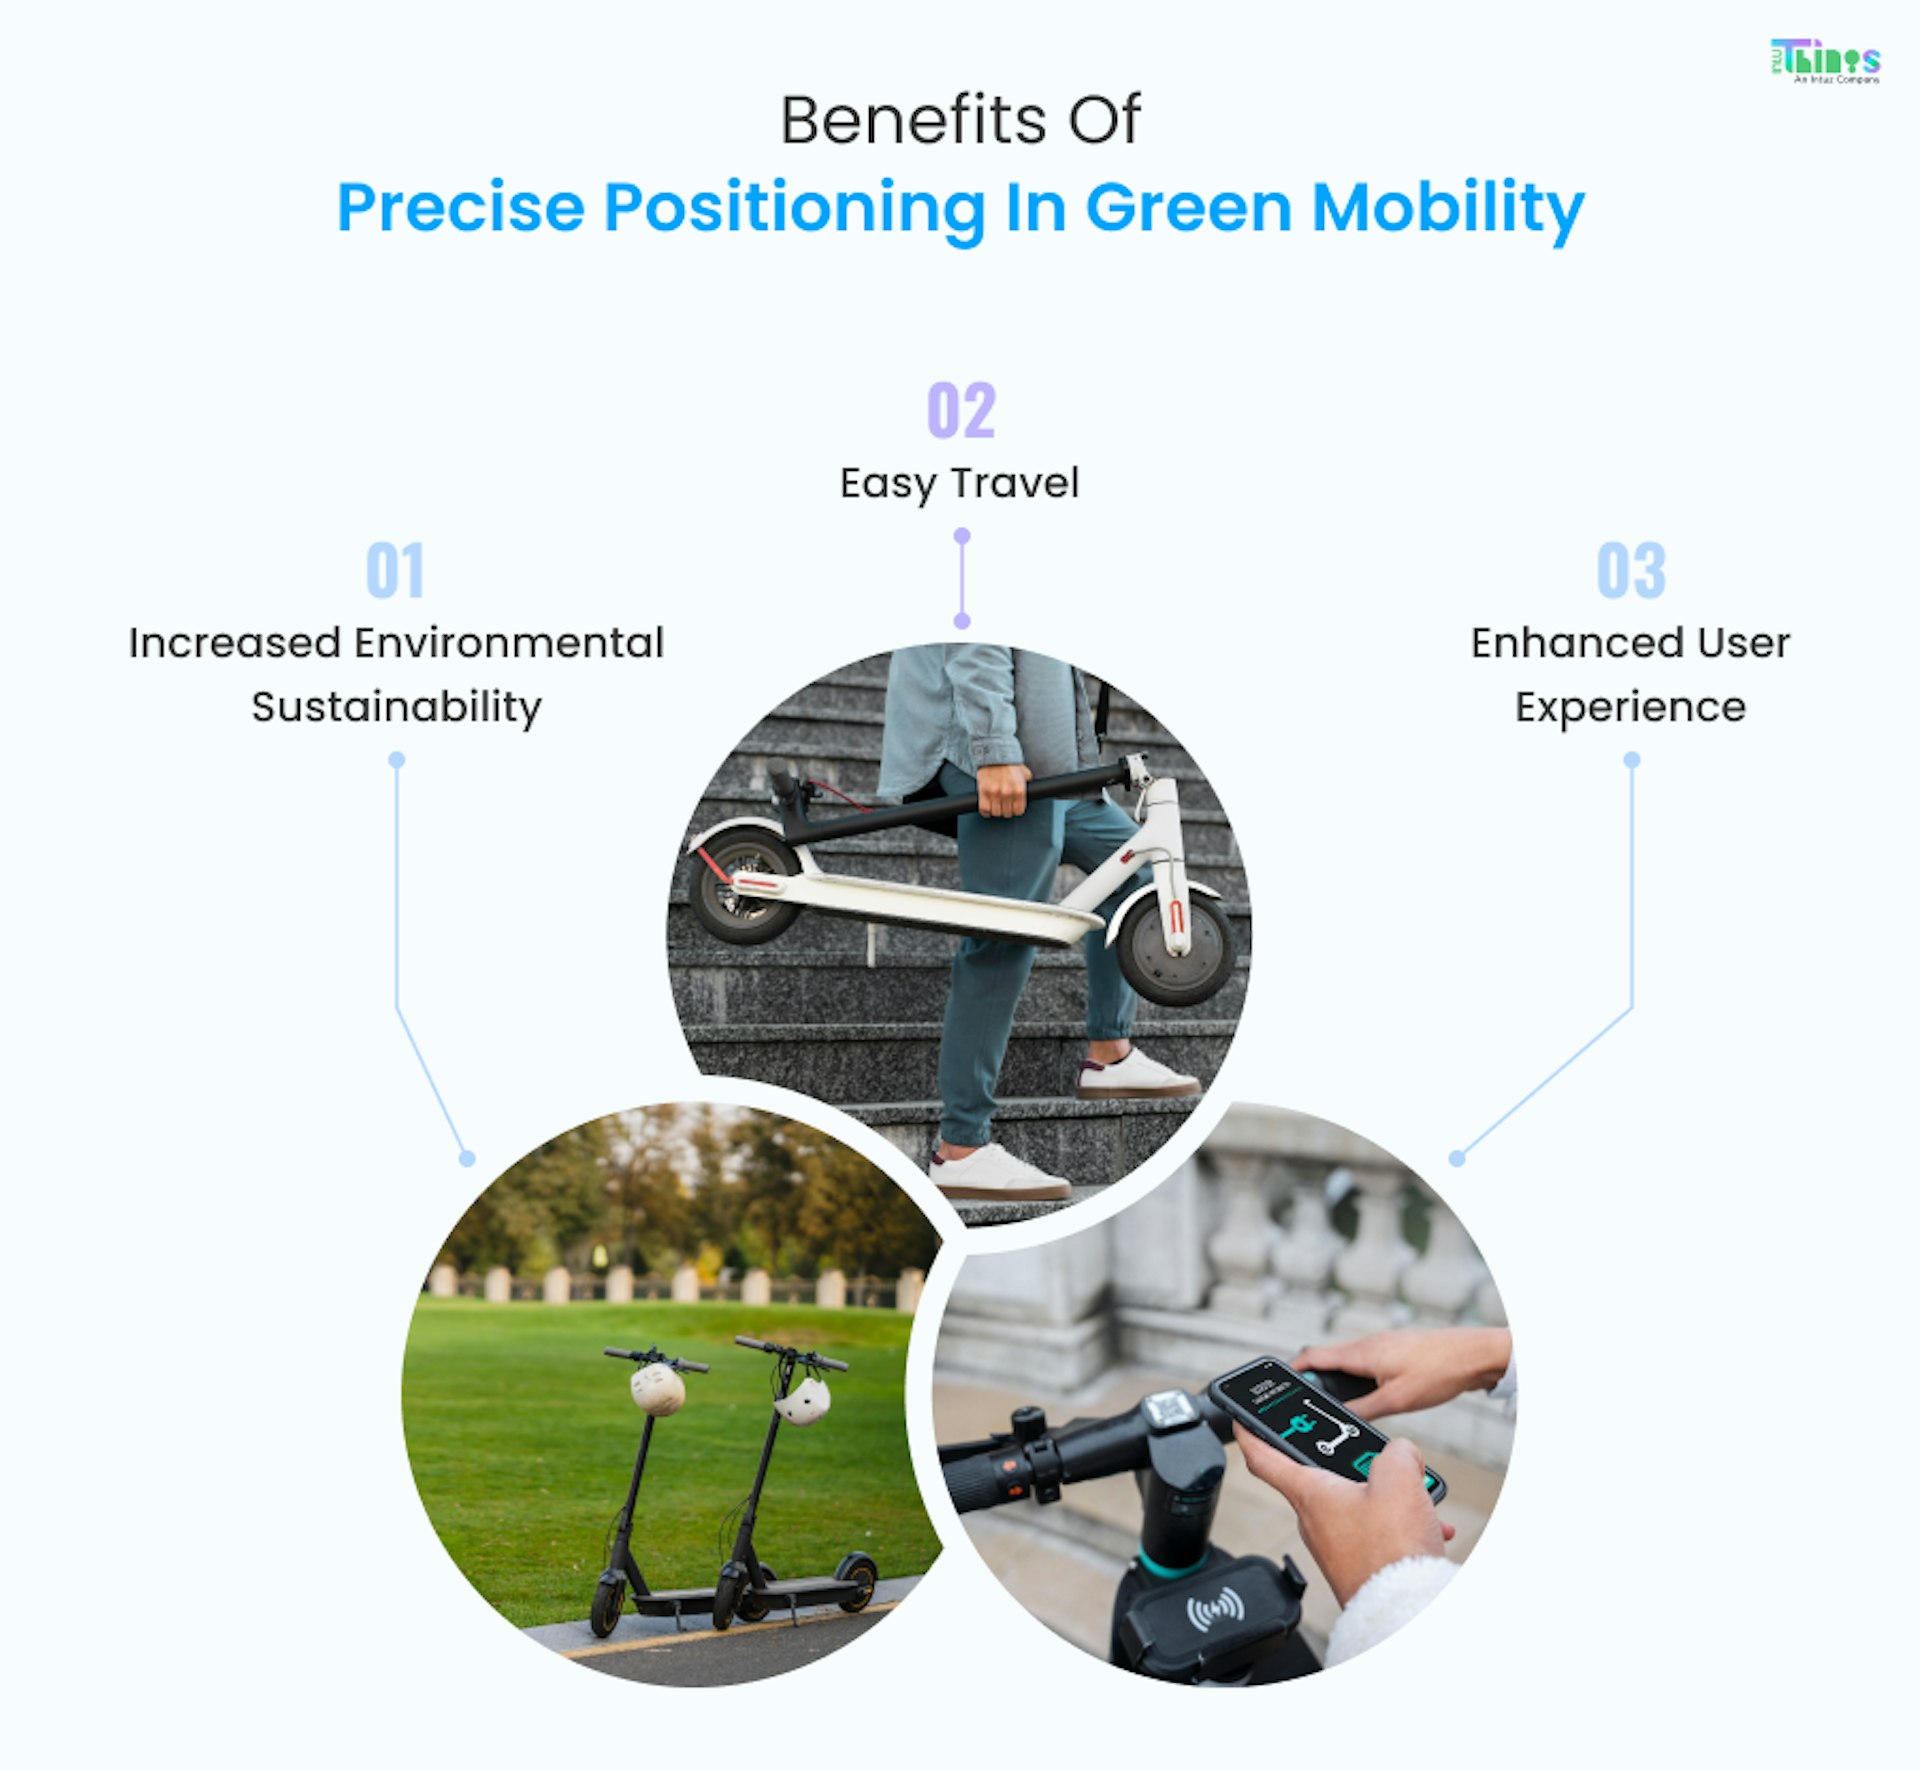 Benefits of precise positioning in green mobility